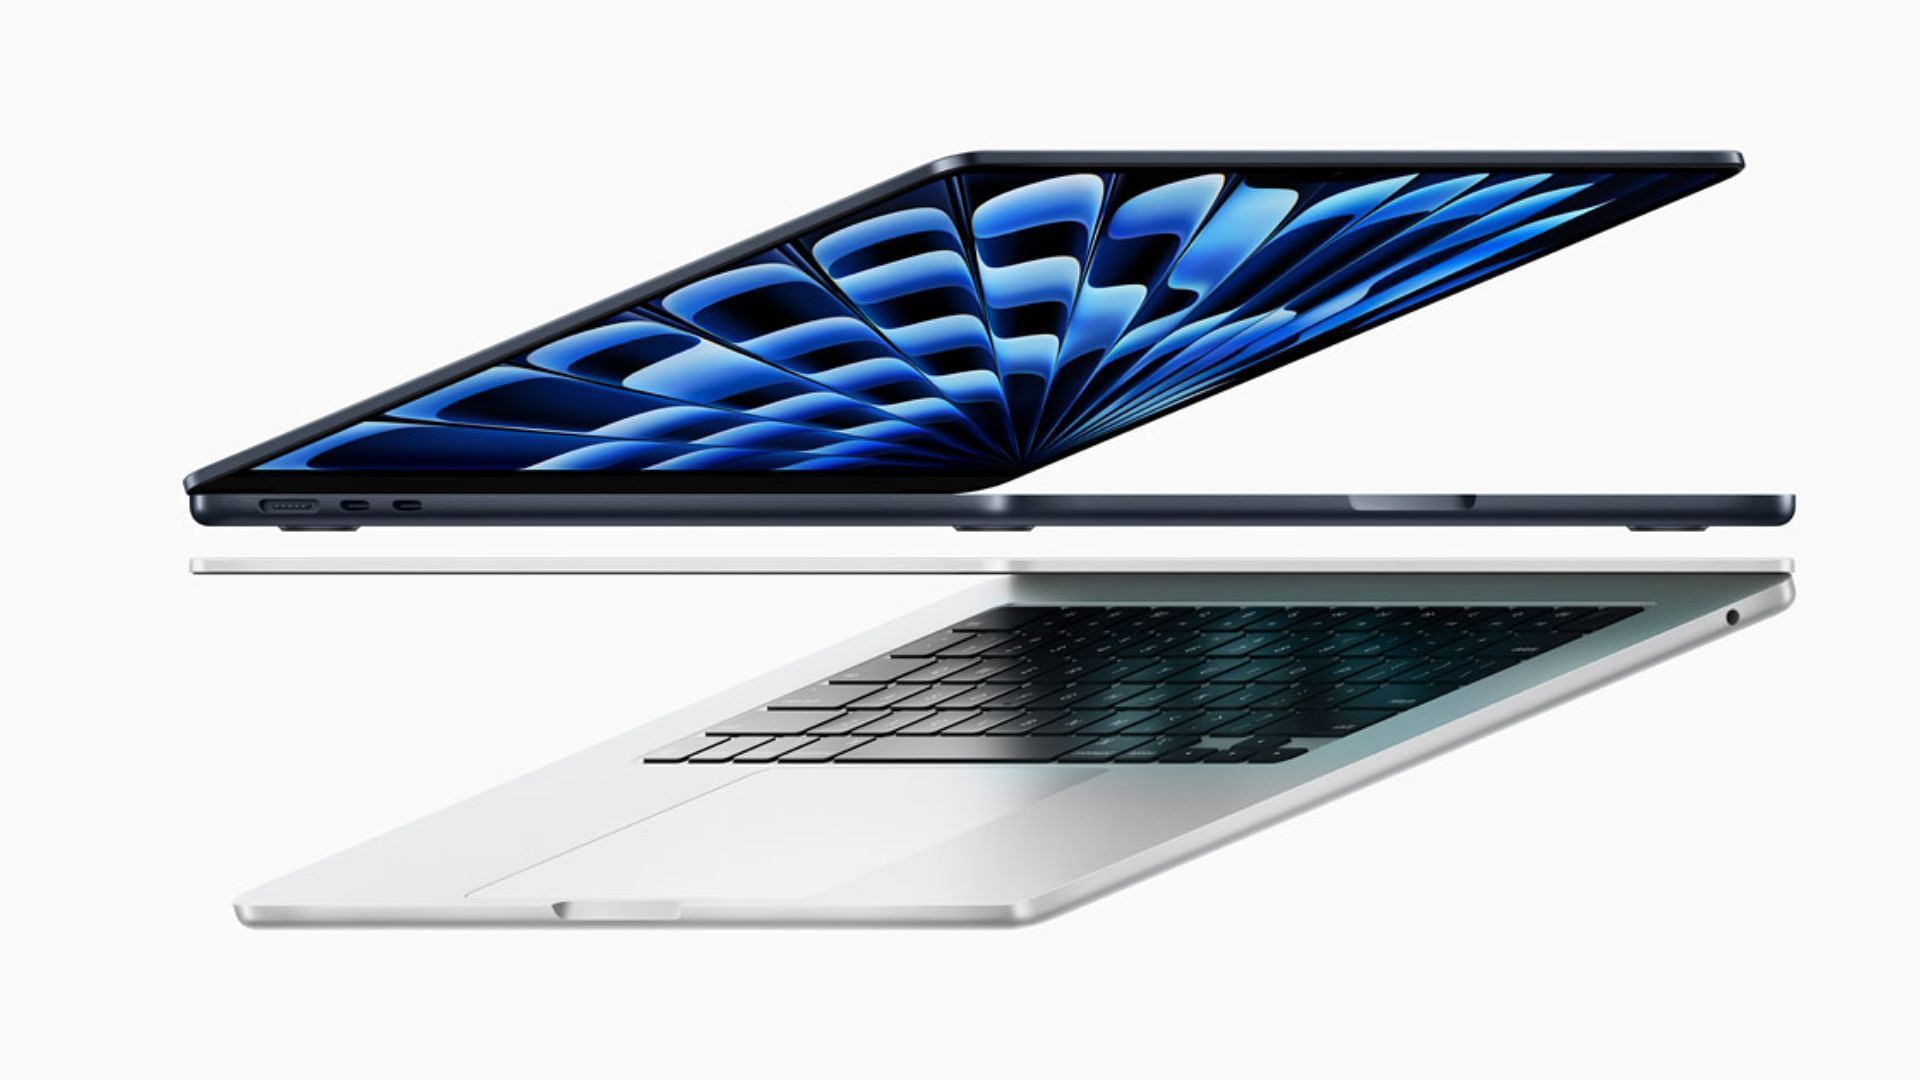 Is the MacBook Air good for gaming at all? (Image via Apple)